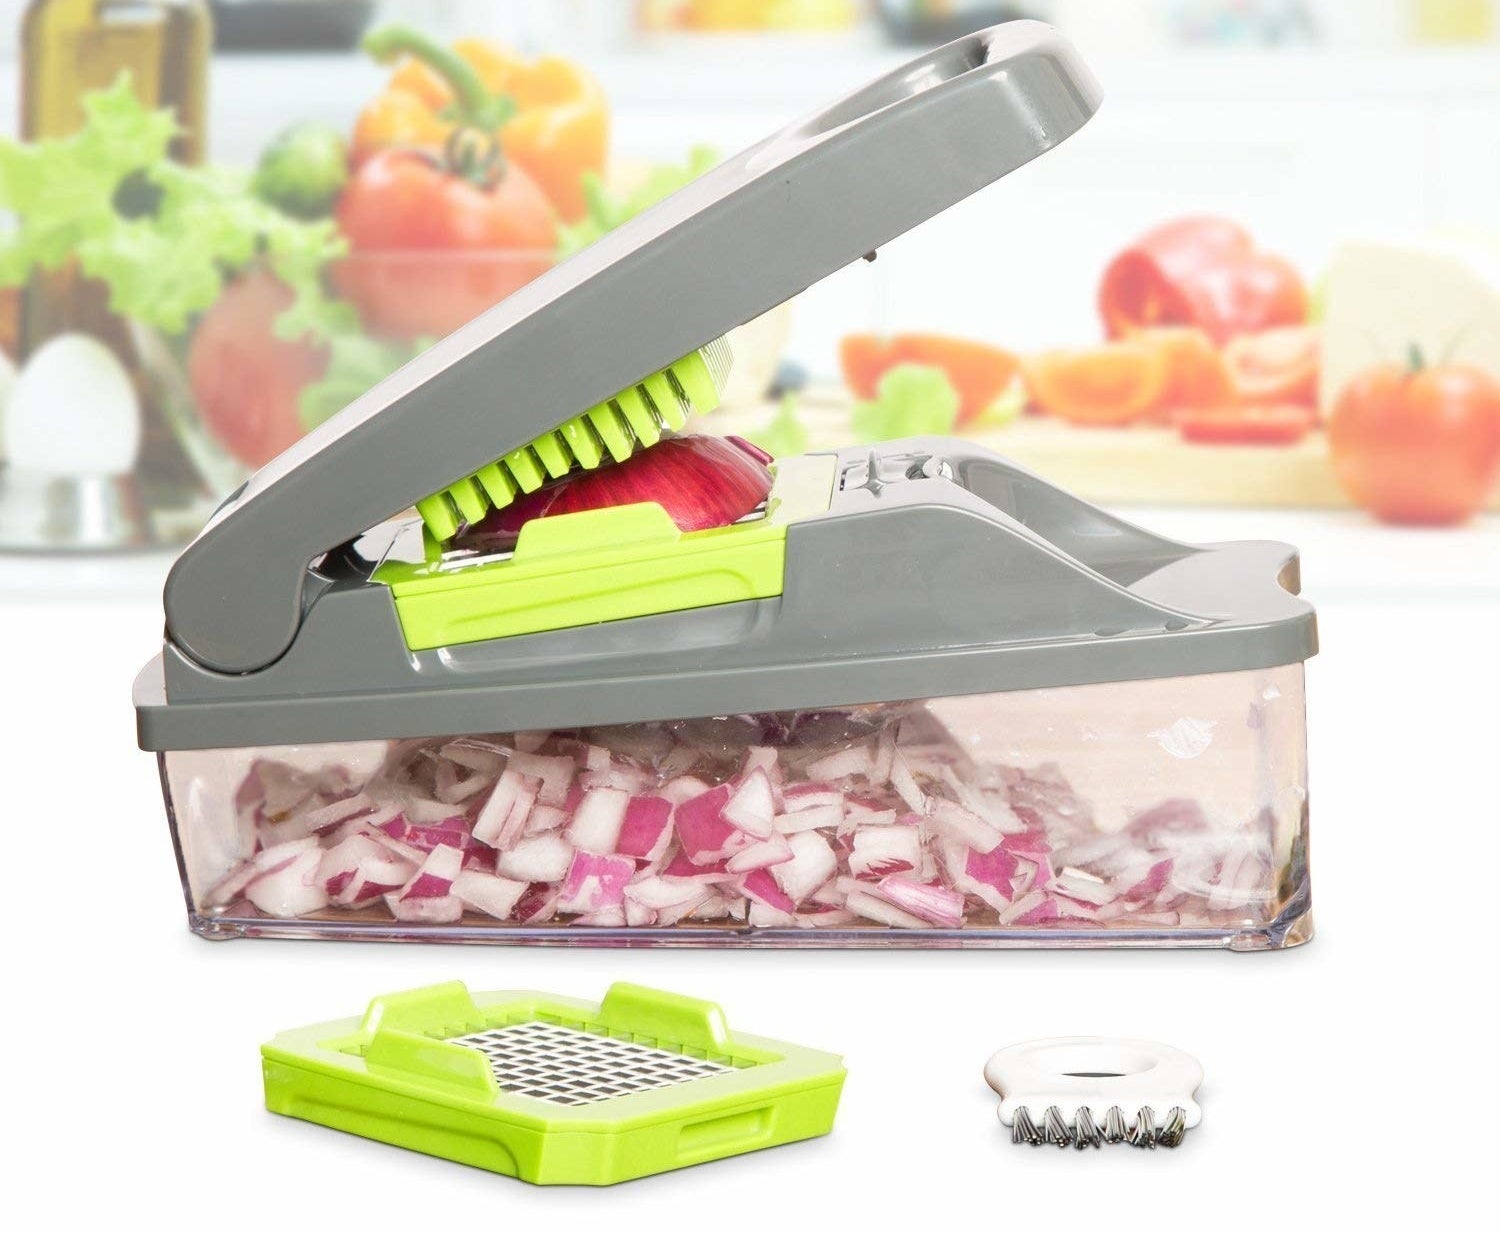 45 Of The Best Kitchen Tools, Accessories, And Gadgets You Can Get